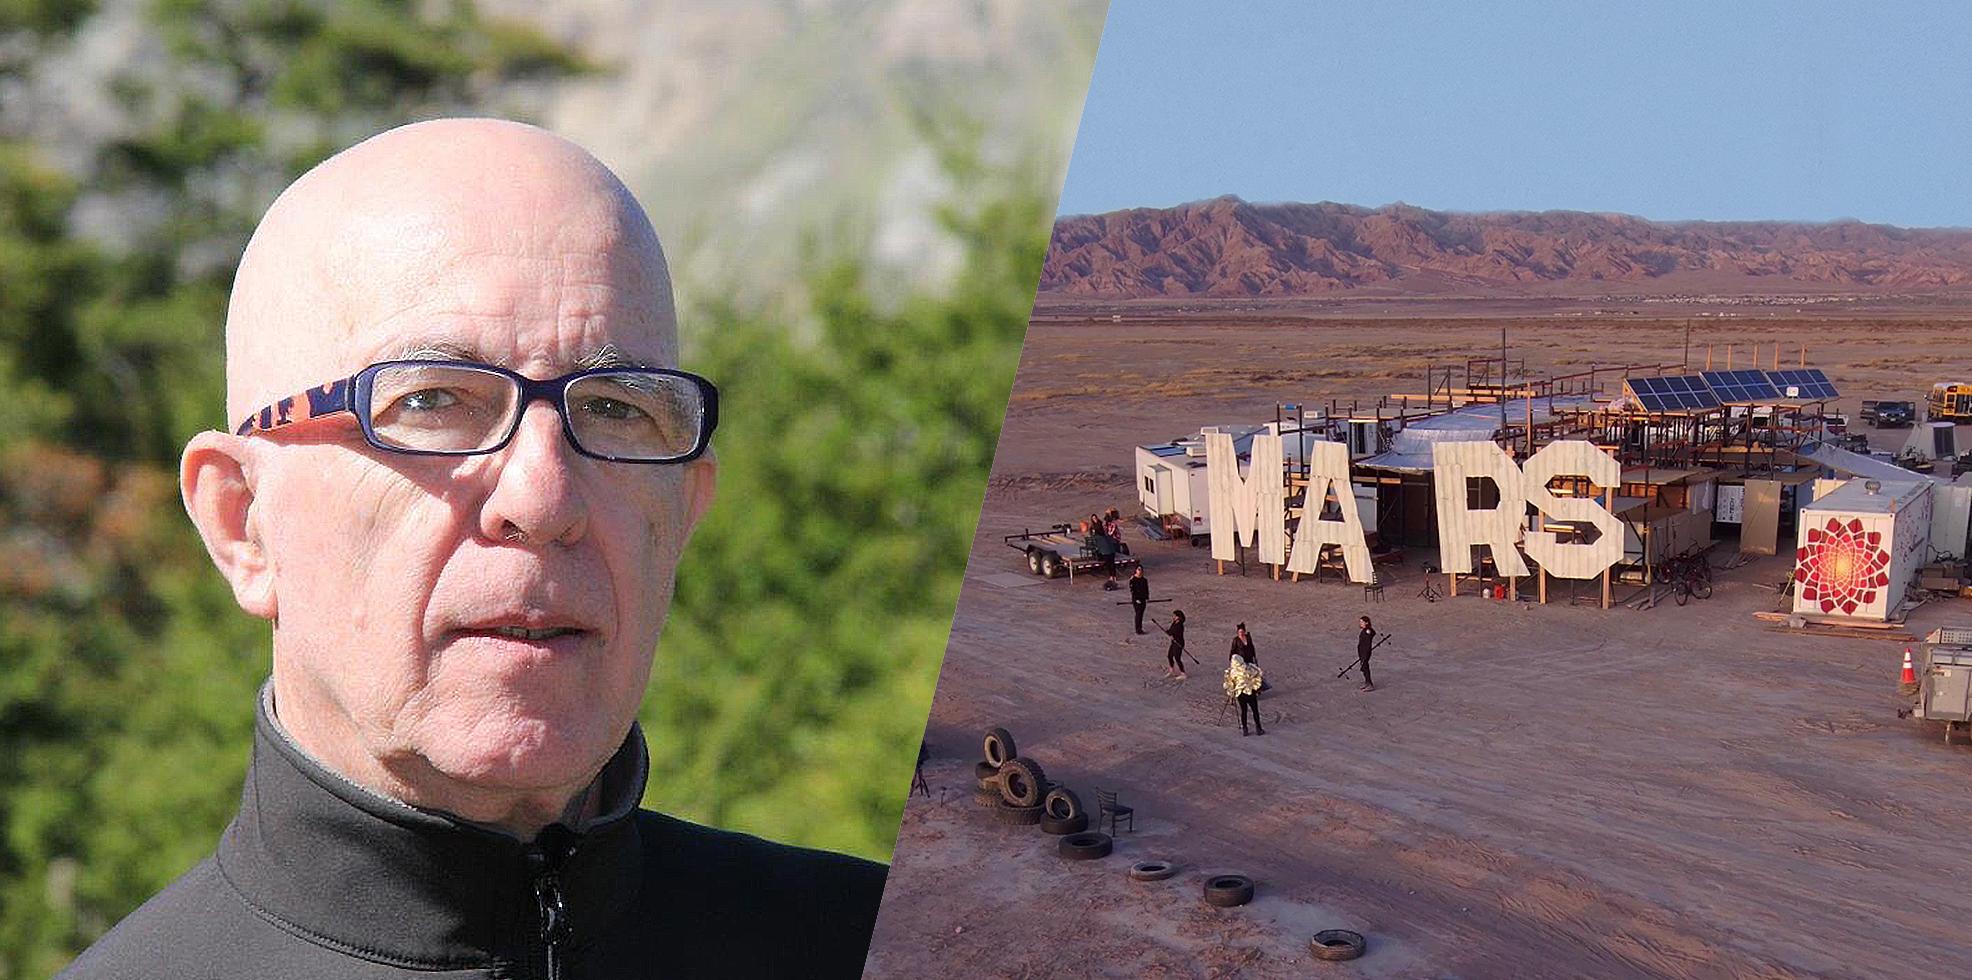 A headshot of a light-skinned man wearing dark-rimmed glasses, cut next to an aerial view of camper vans set against a dry desert backdrop with mountains in the distance